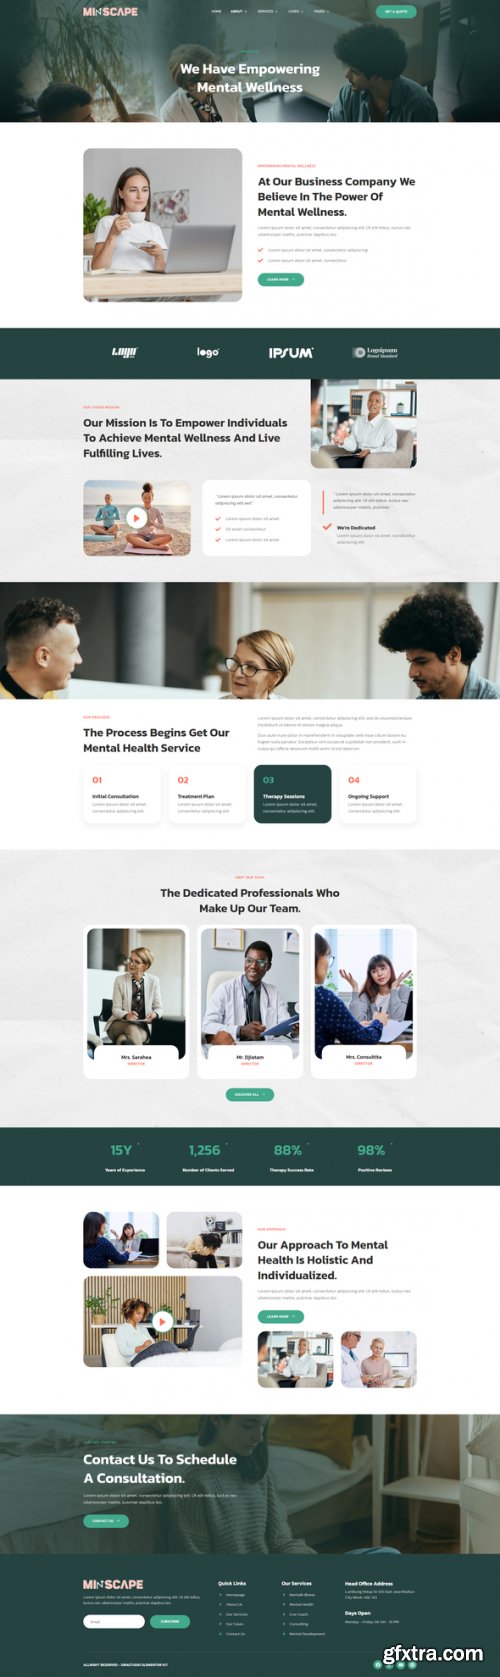 Themeforest - Mindscape - Mental Health Consulting Elementor Template Kit 51347647 v1.0.0 - Nulled